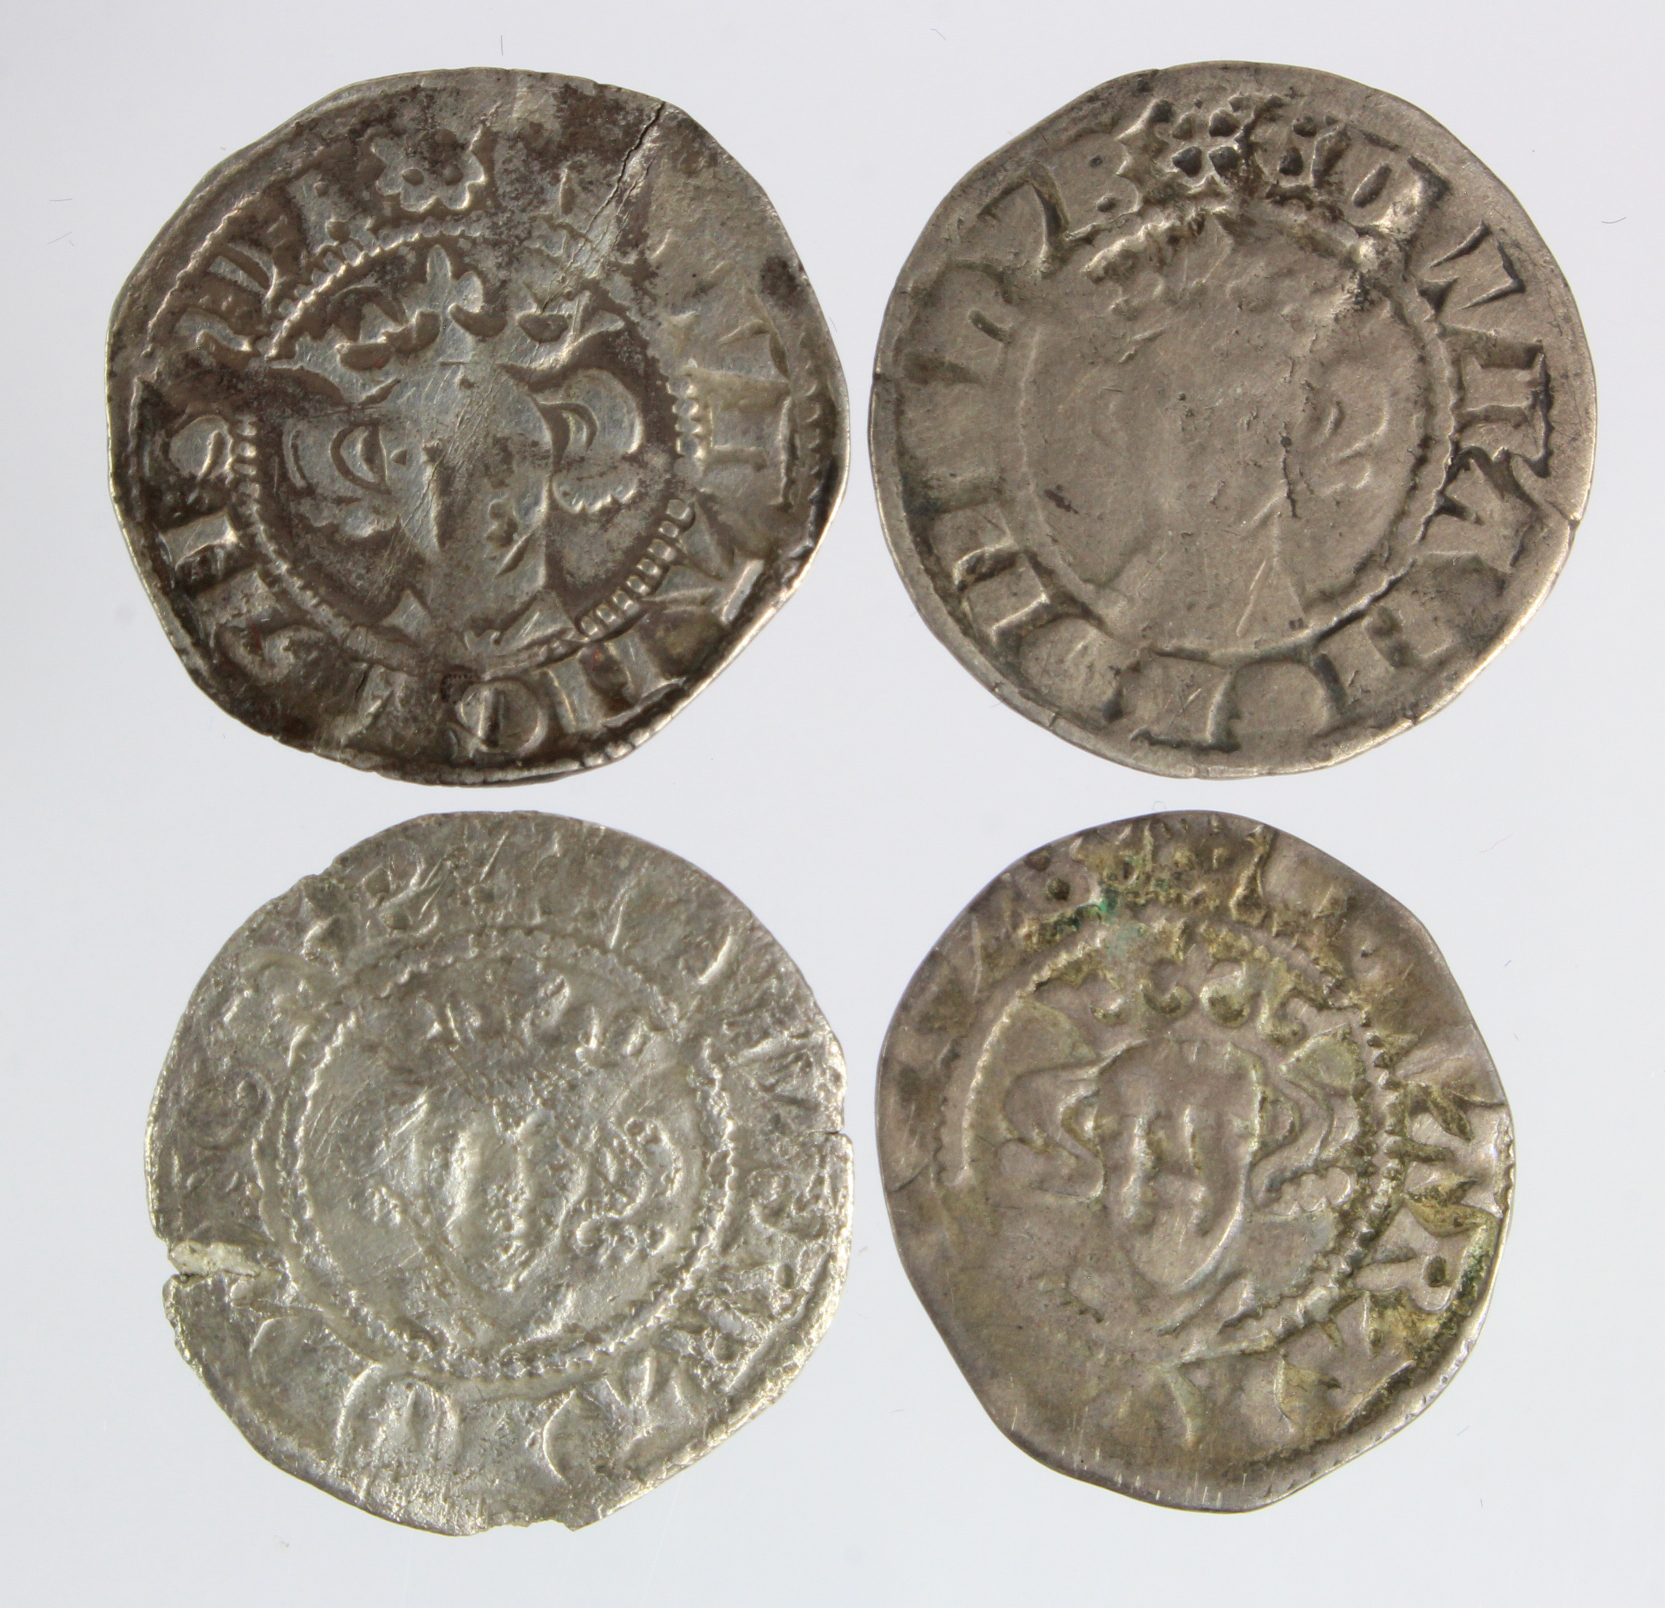 Edward I Durham silver pennies of Bishop Bec (4): Classes unidentified, F-GF; with tickets/